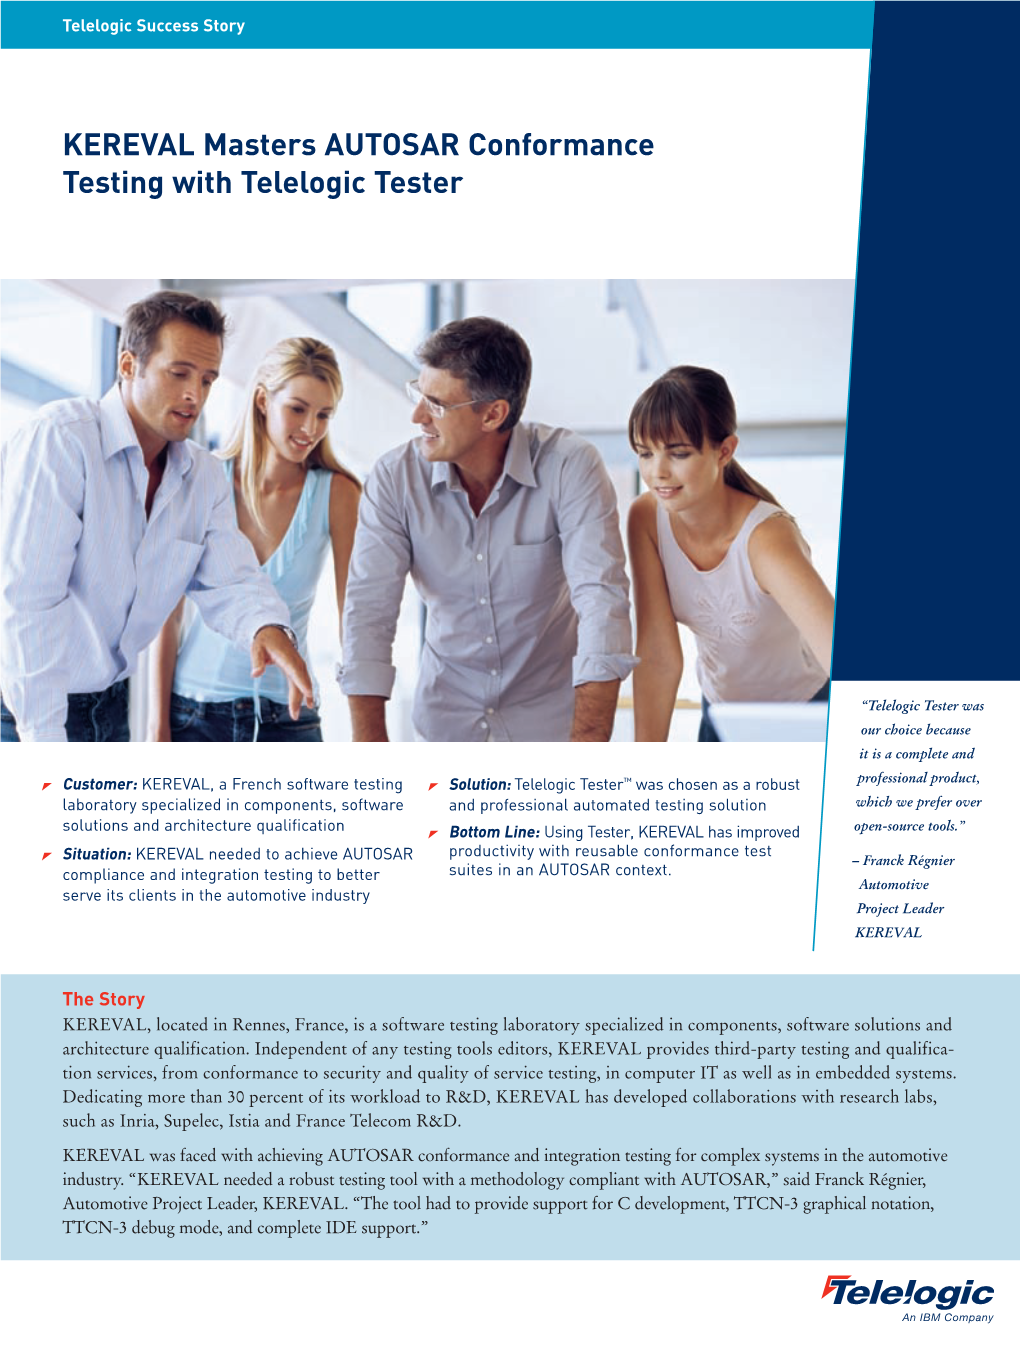 KEREVAL Masters AUTOSAR Conformance Testing with Telelogic Tester